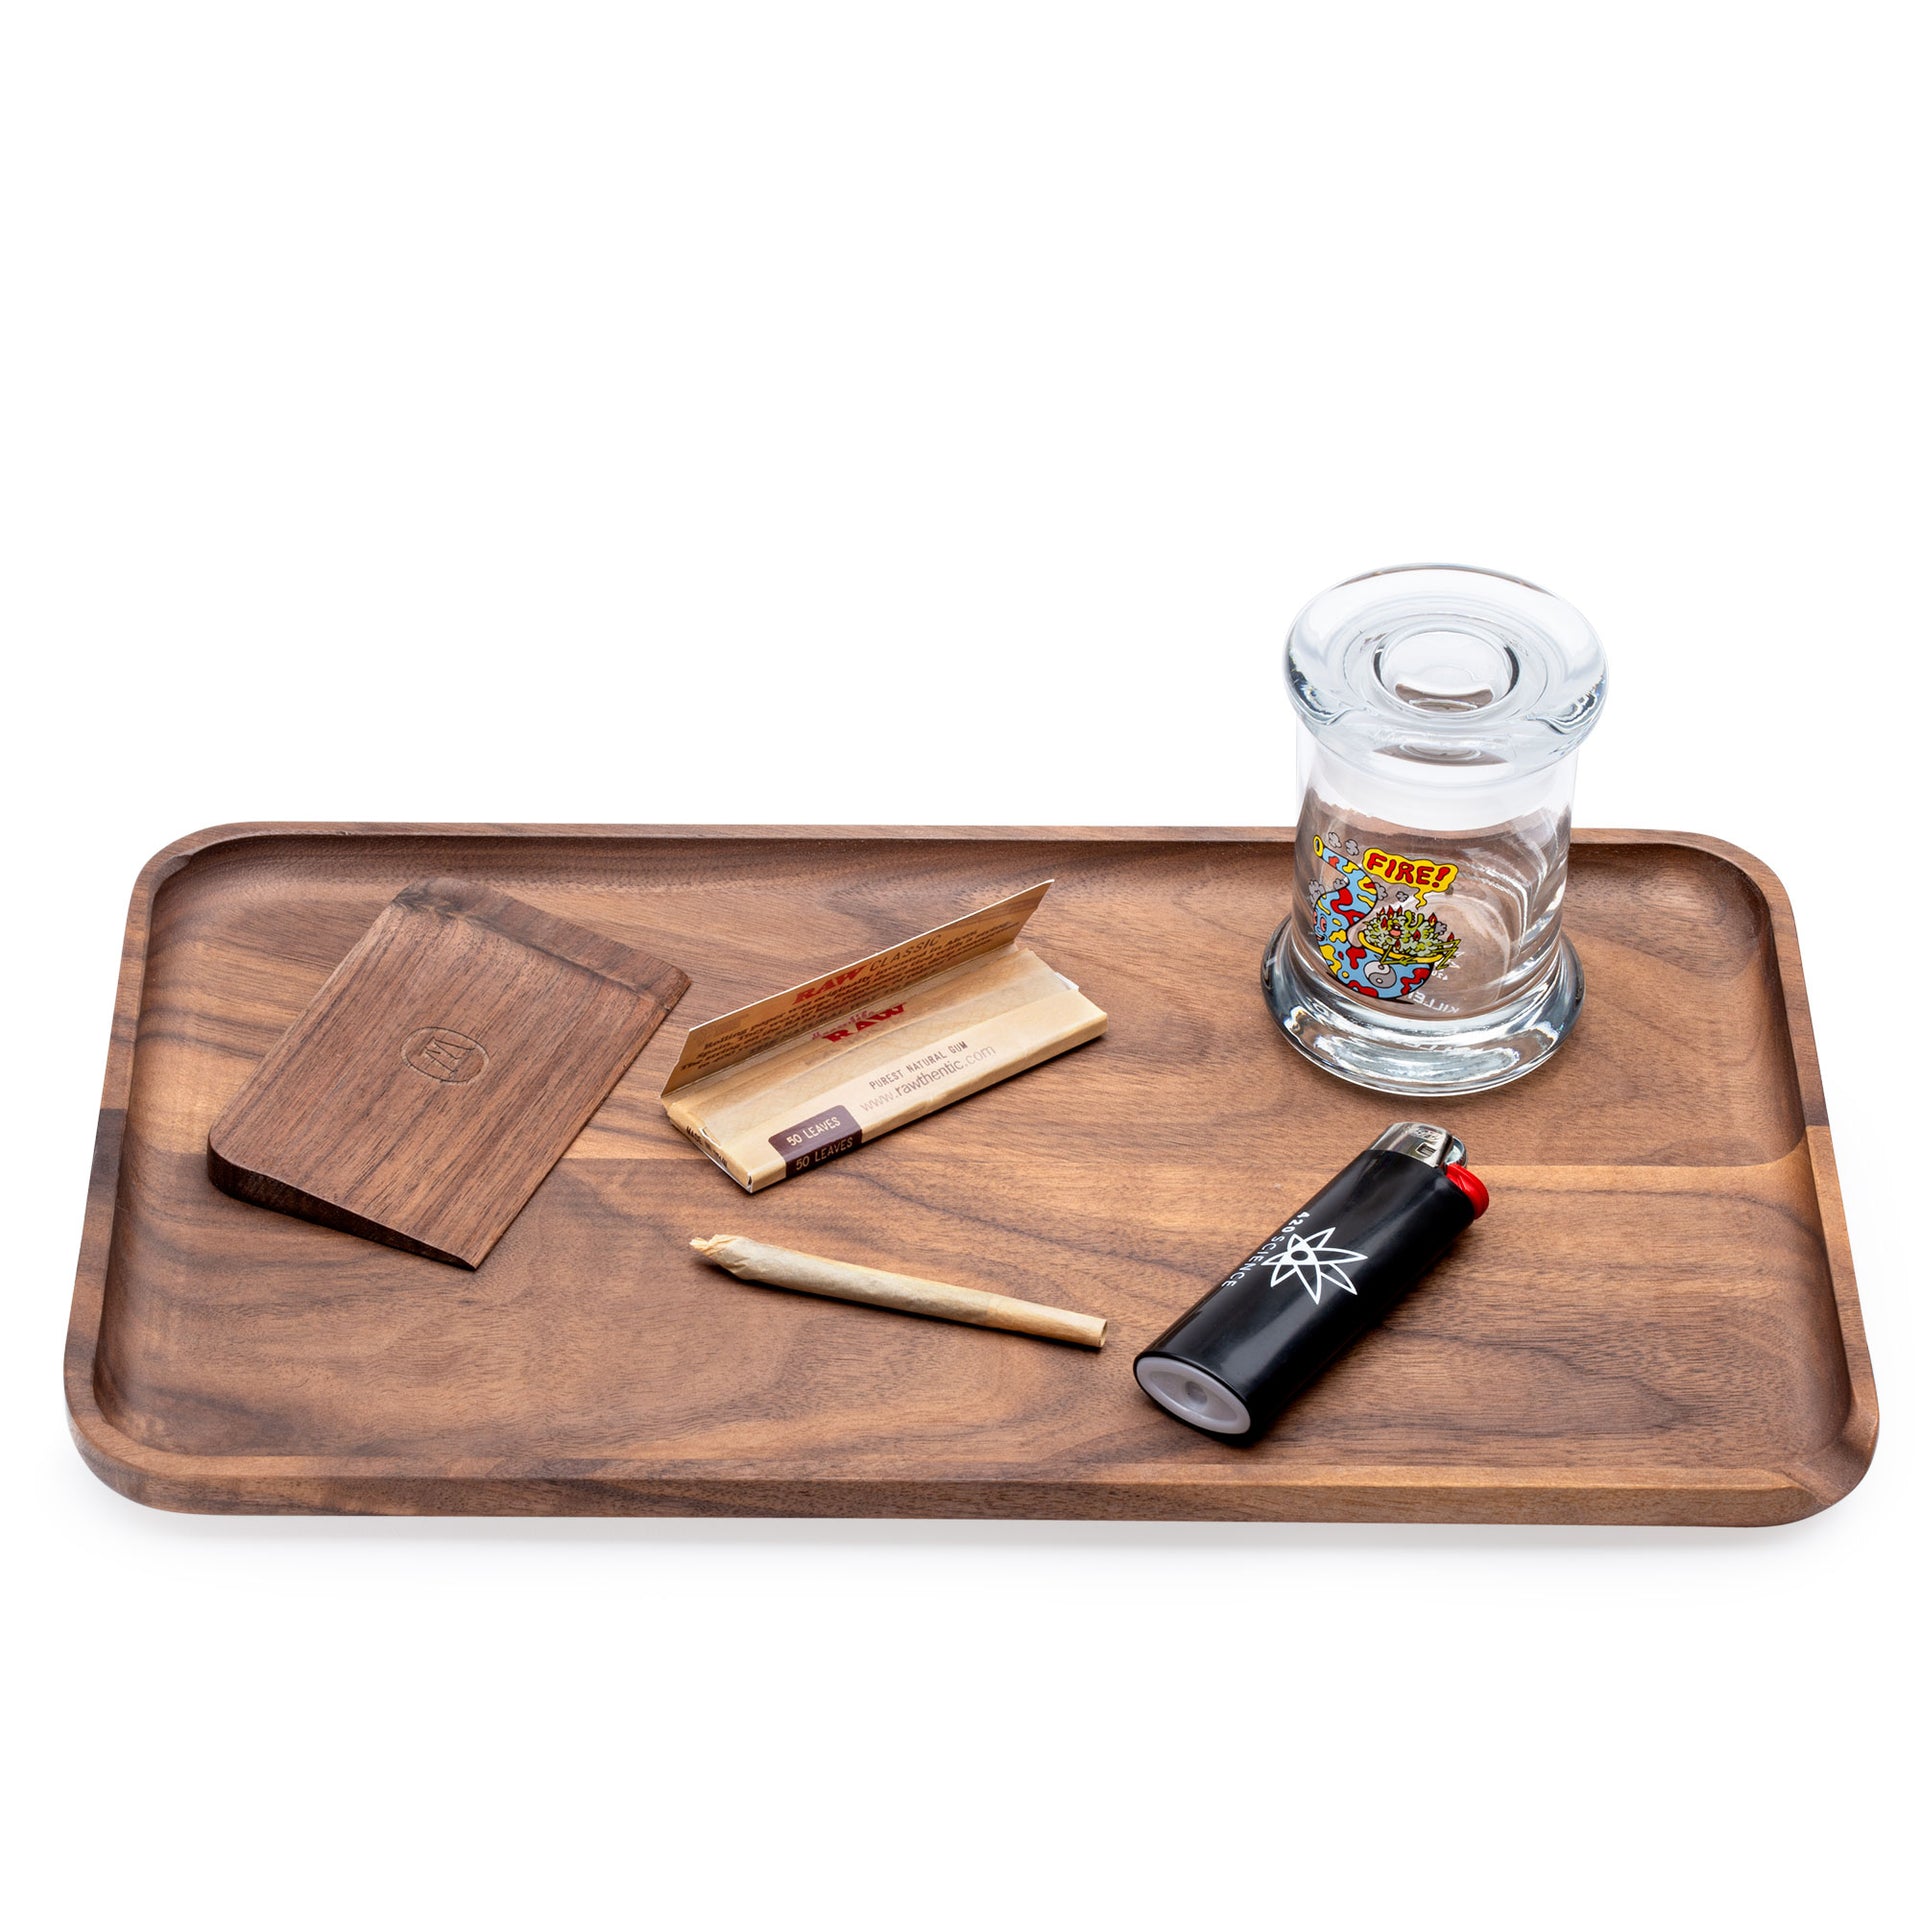 RYOT Solid Wood Walnut Rolling Tray / $ 44.00 at 420 Science